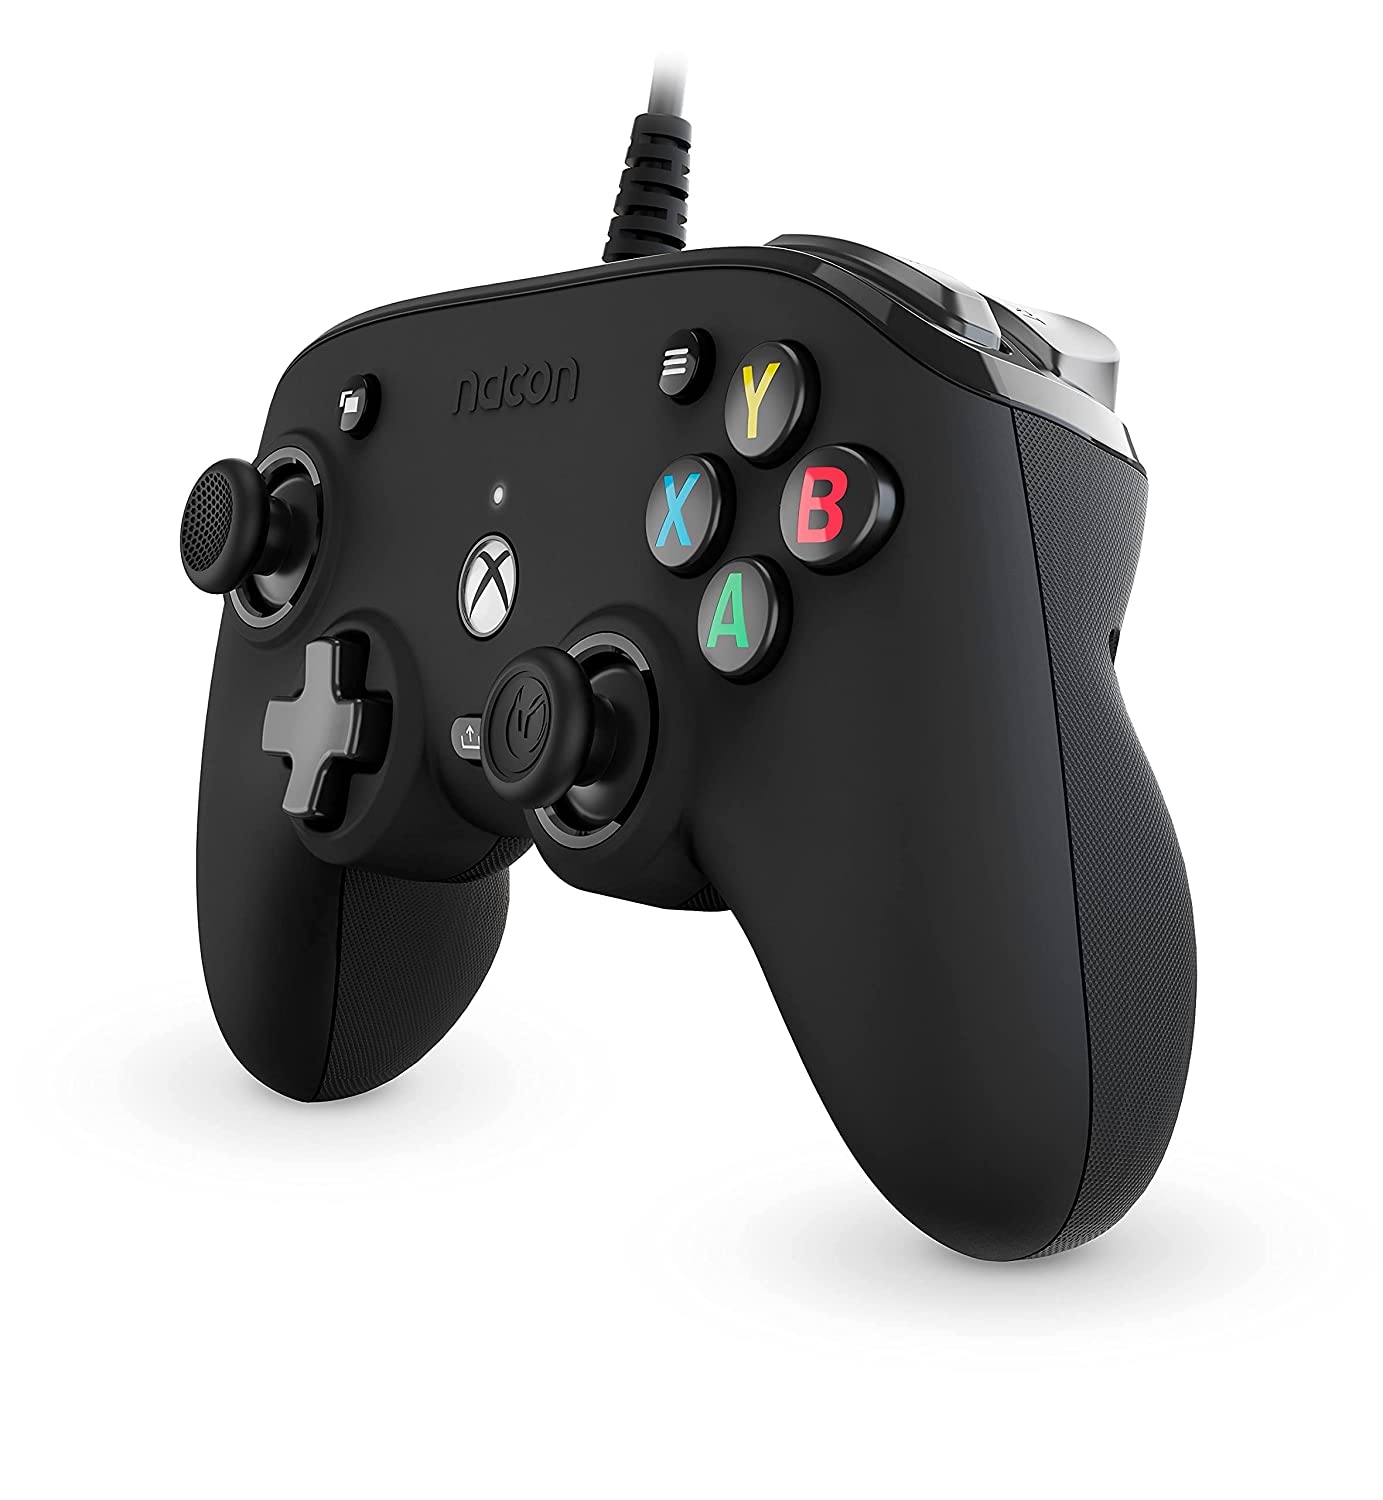 Nacon PRO Compact Controller for Xbox Series X|S and Xbox One - Black - Pro-Distributing